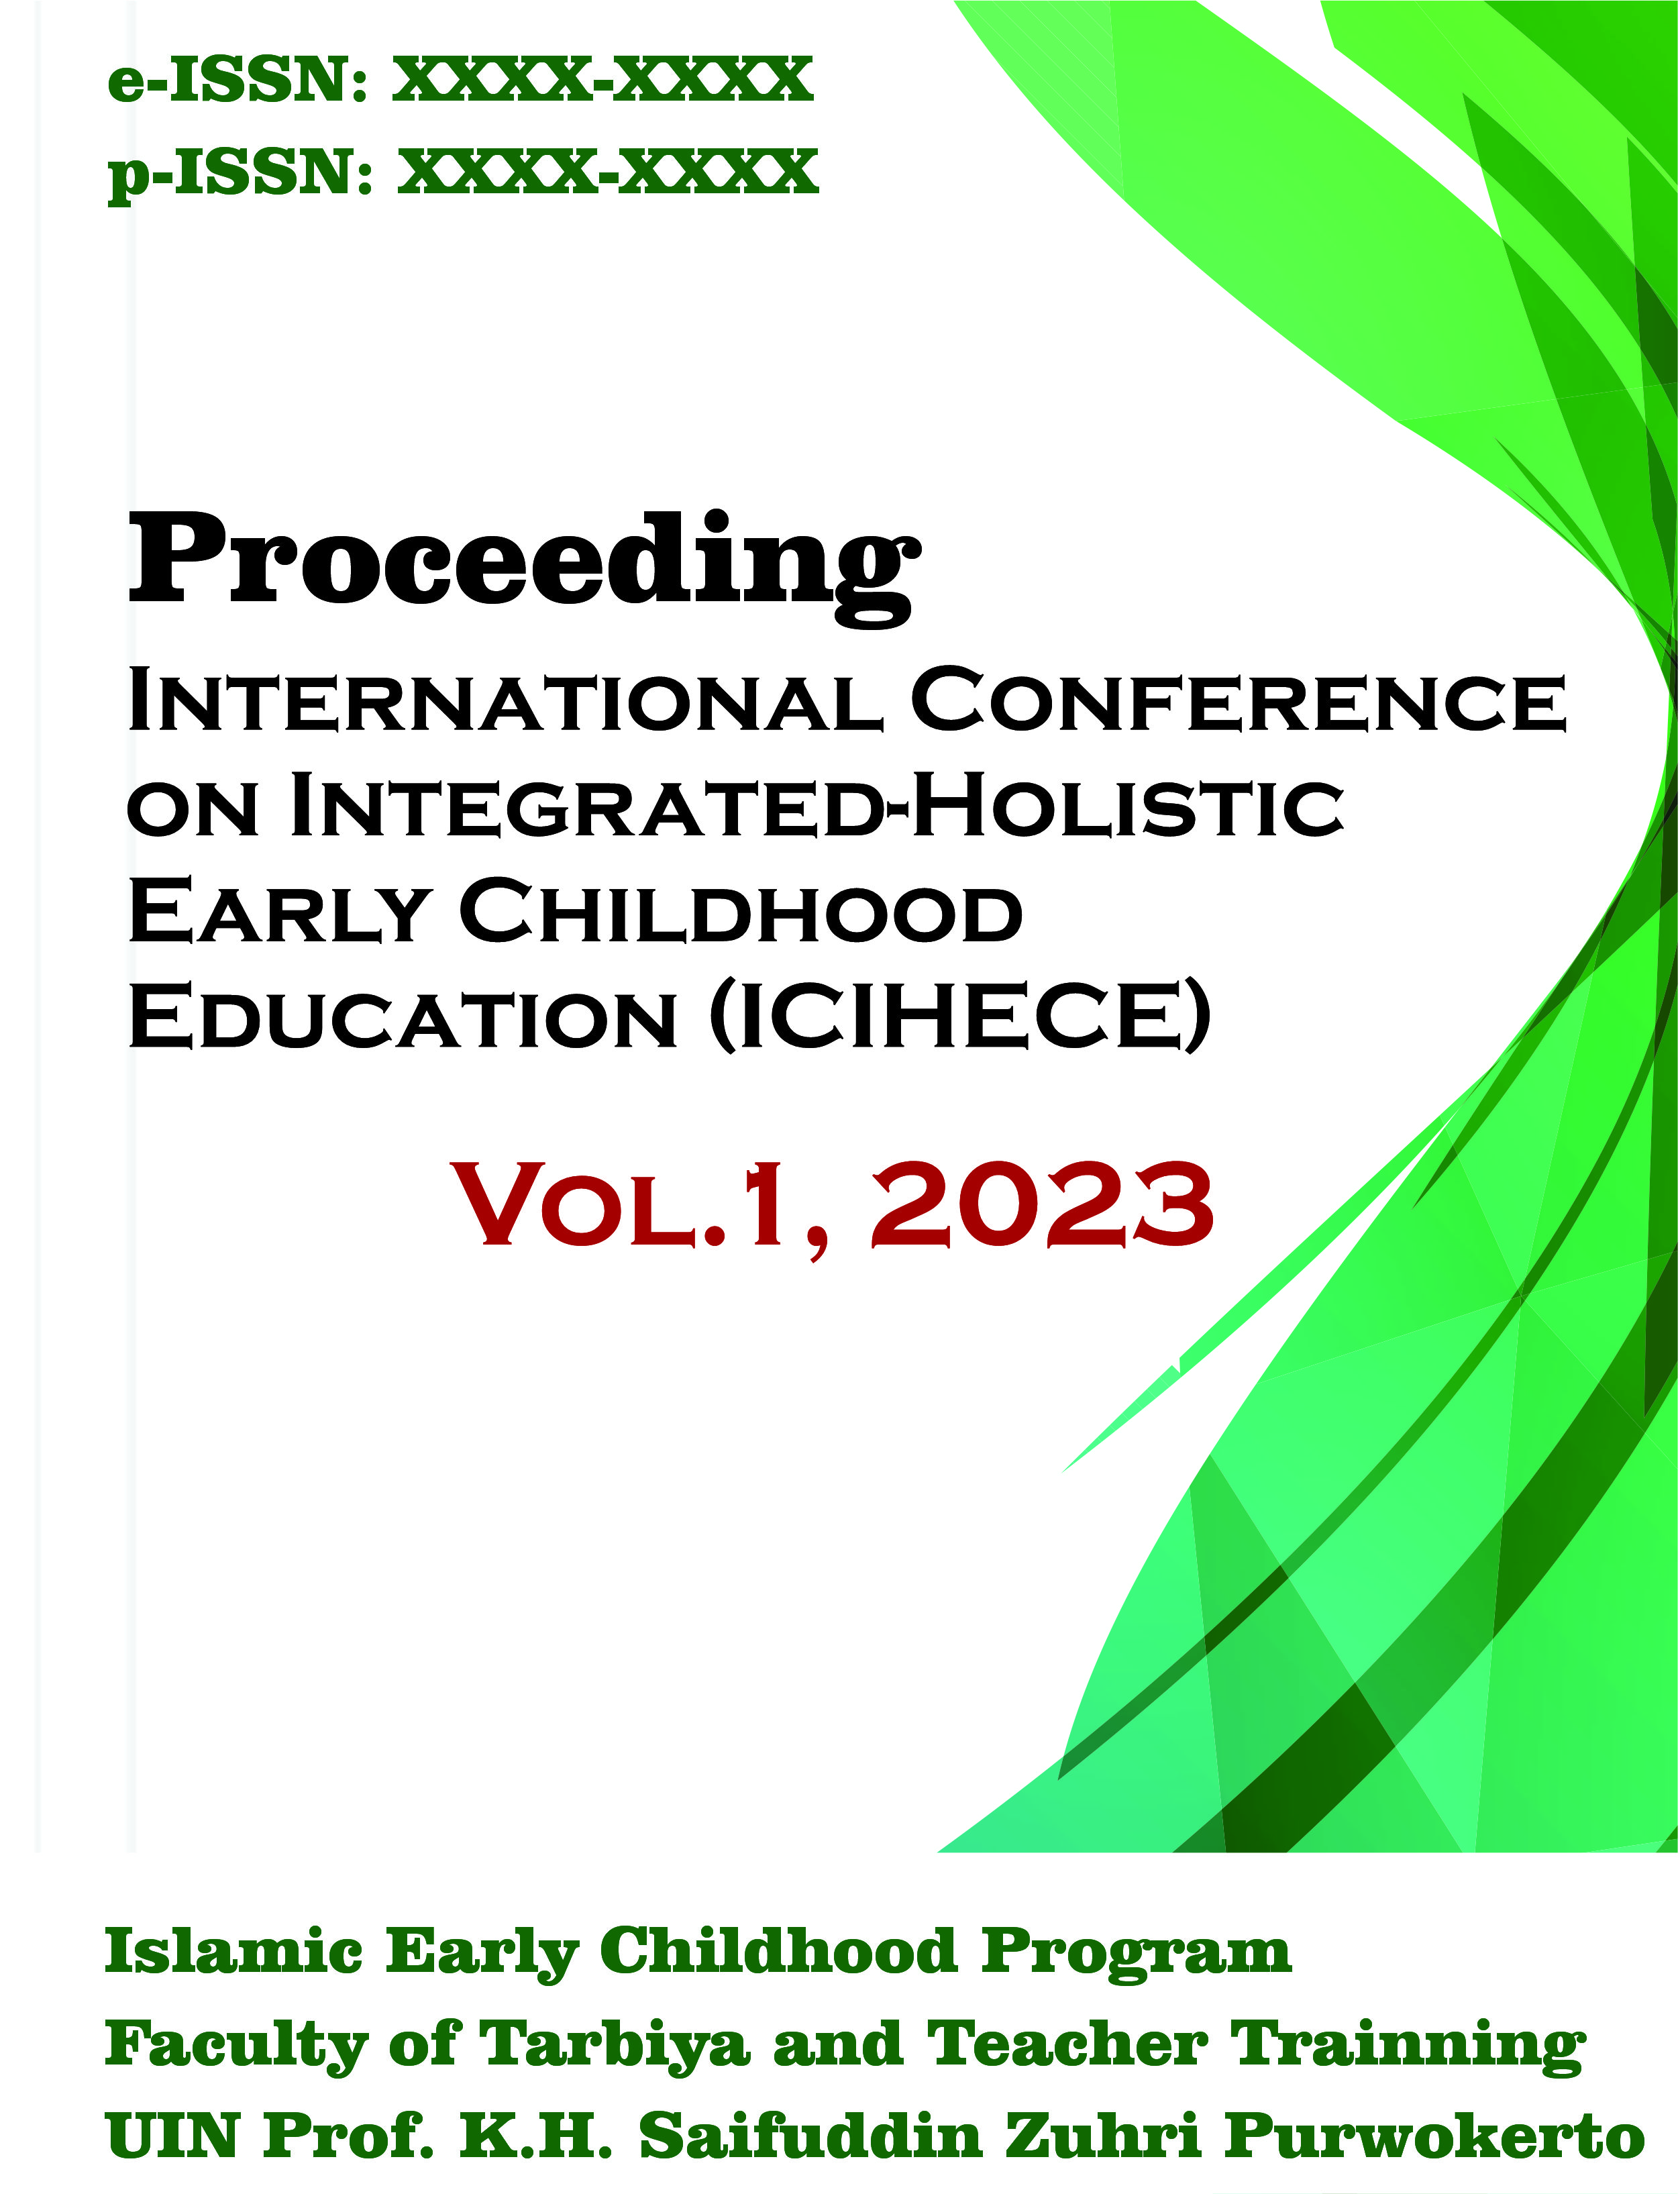 					View Vol. 1 (2023): The 1st International Conference on Integrated-Holistic Early Childhood Education (ICIHECE)
				